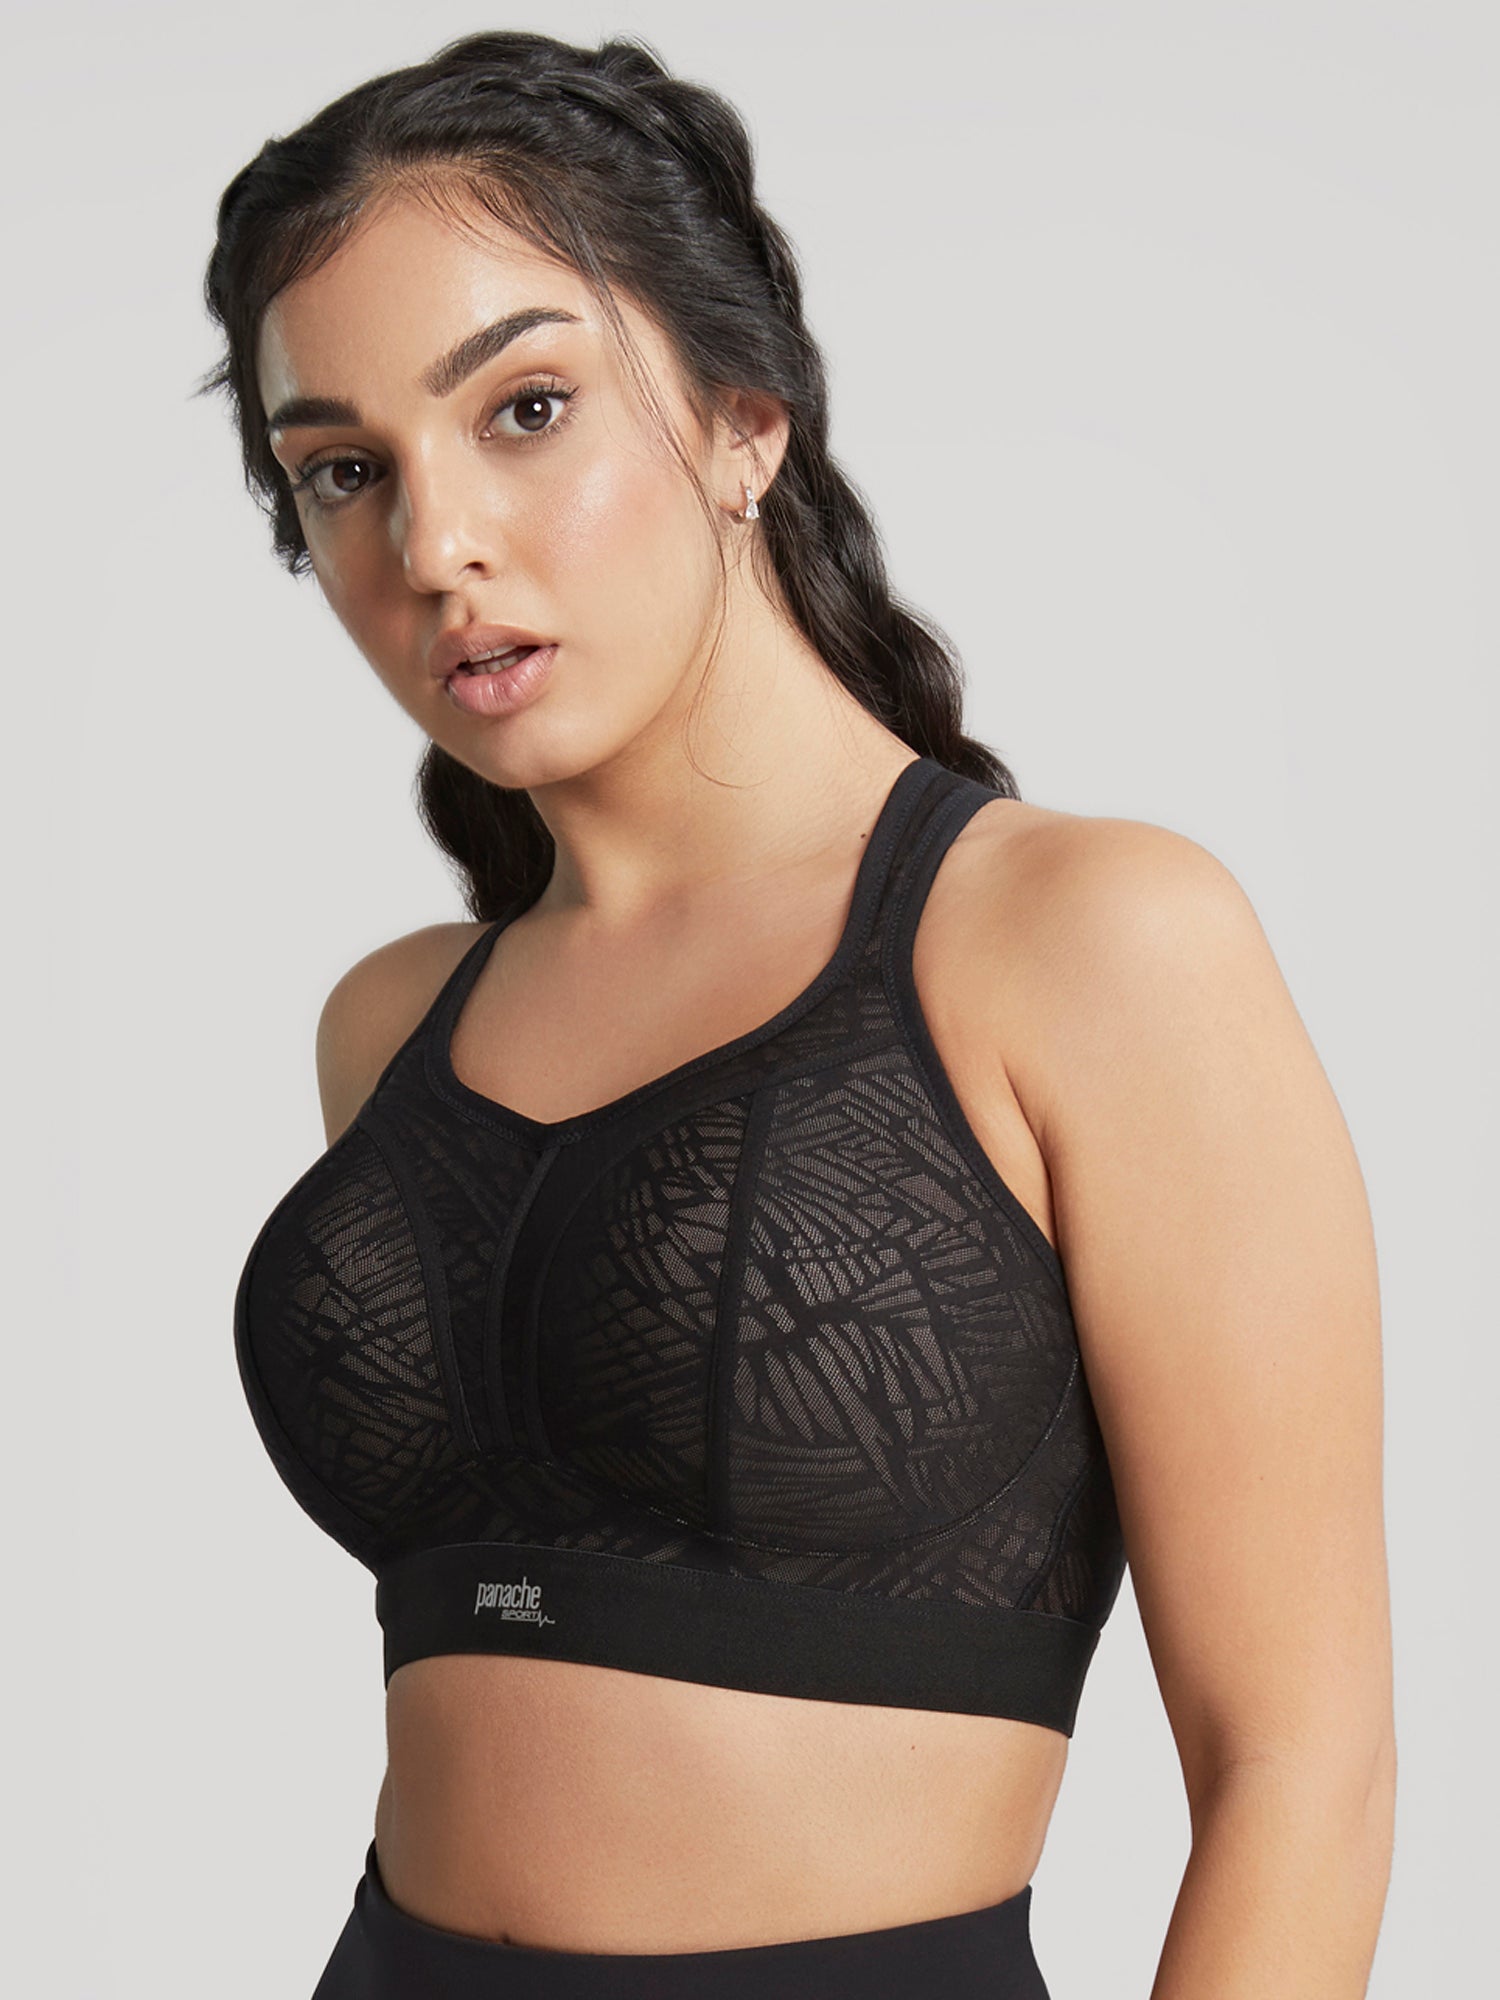 Buy Panache Racer Back Wired Moulded Sports Bra from the Next UK